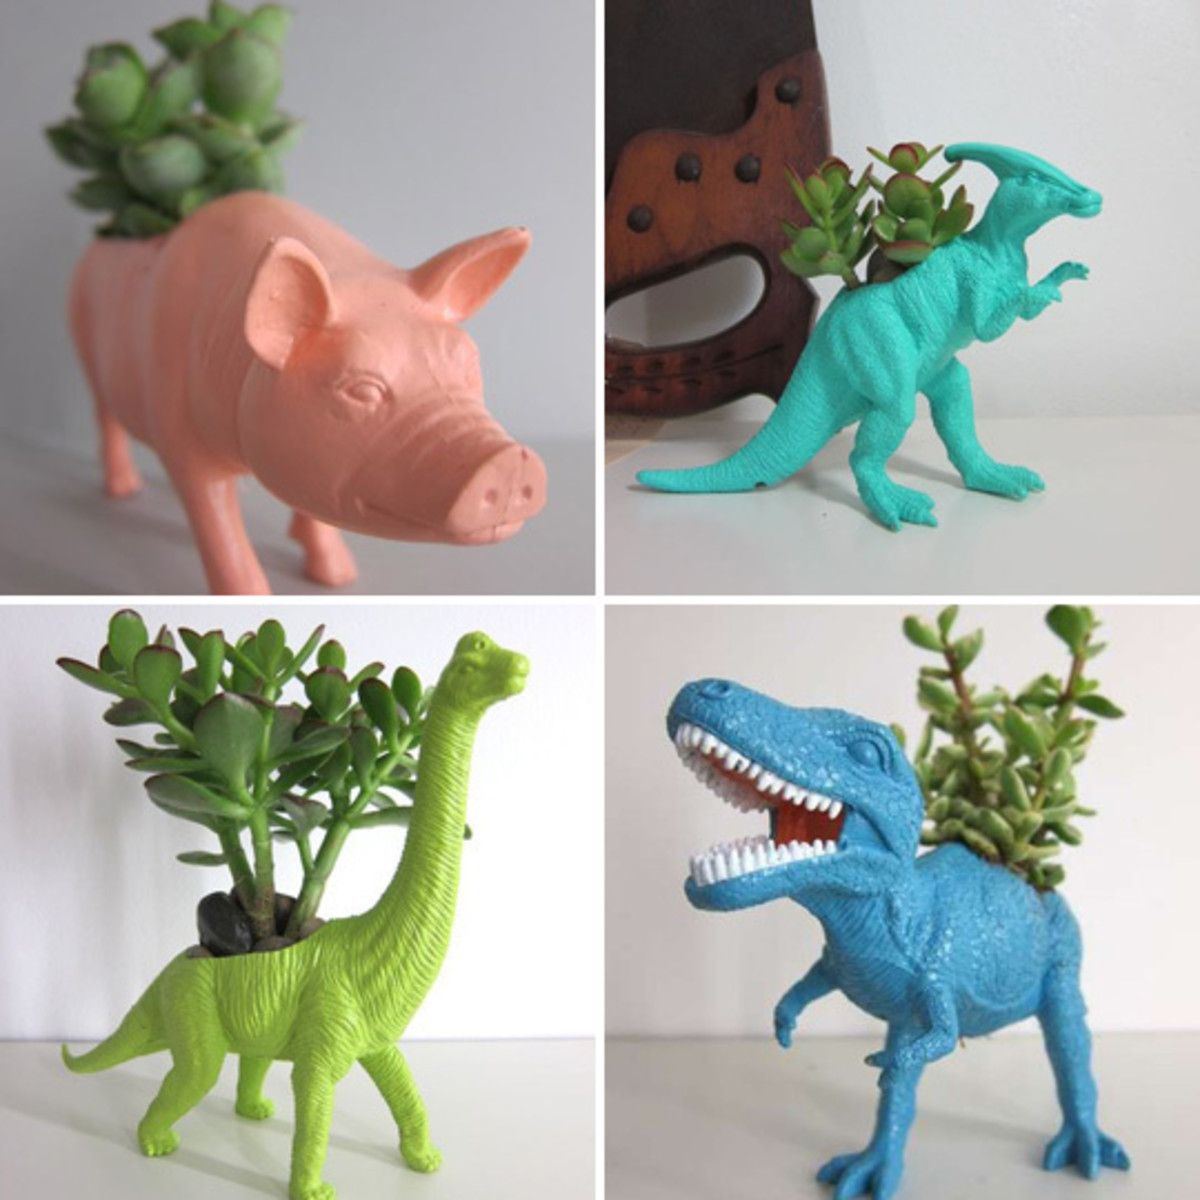 Plenty of old toys are hollow and can be turned into cute little planters.